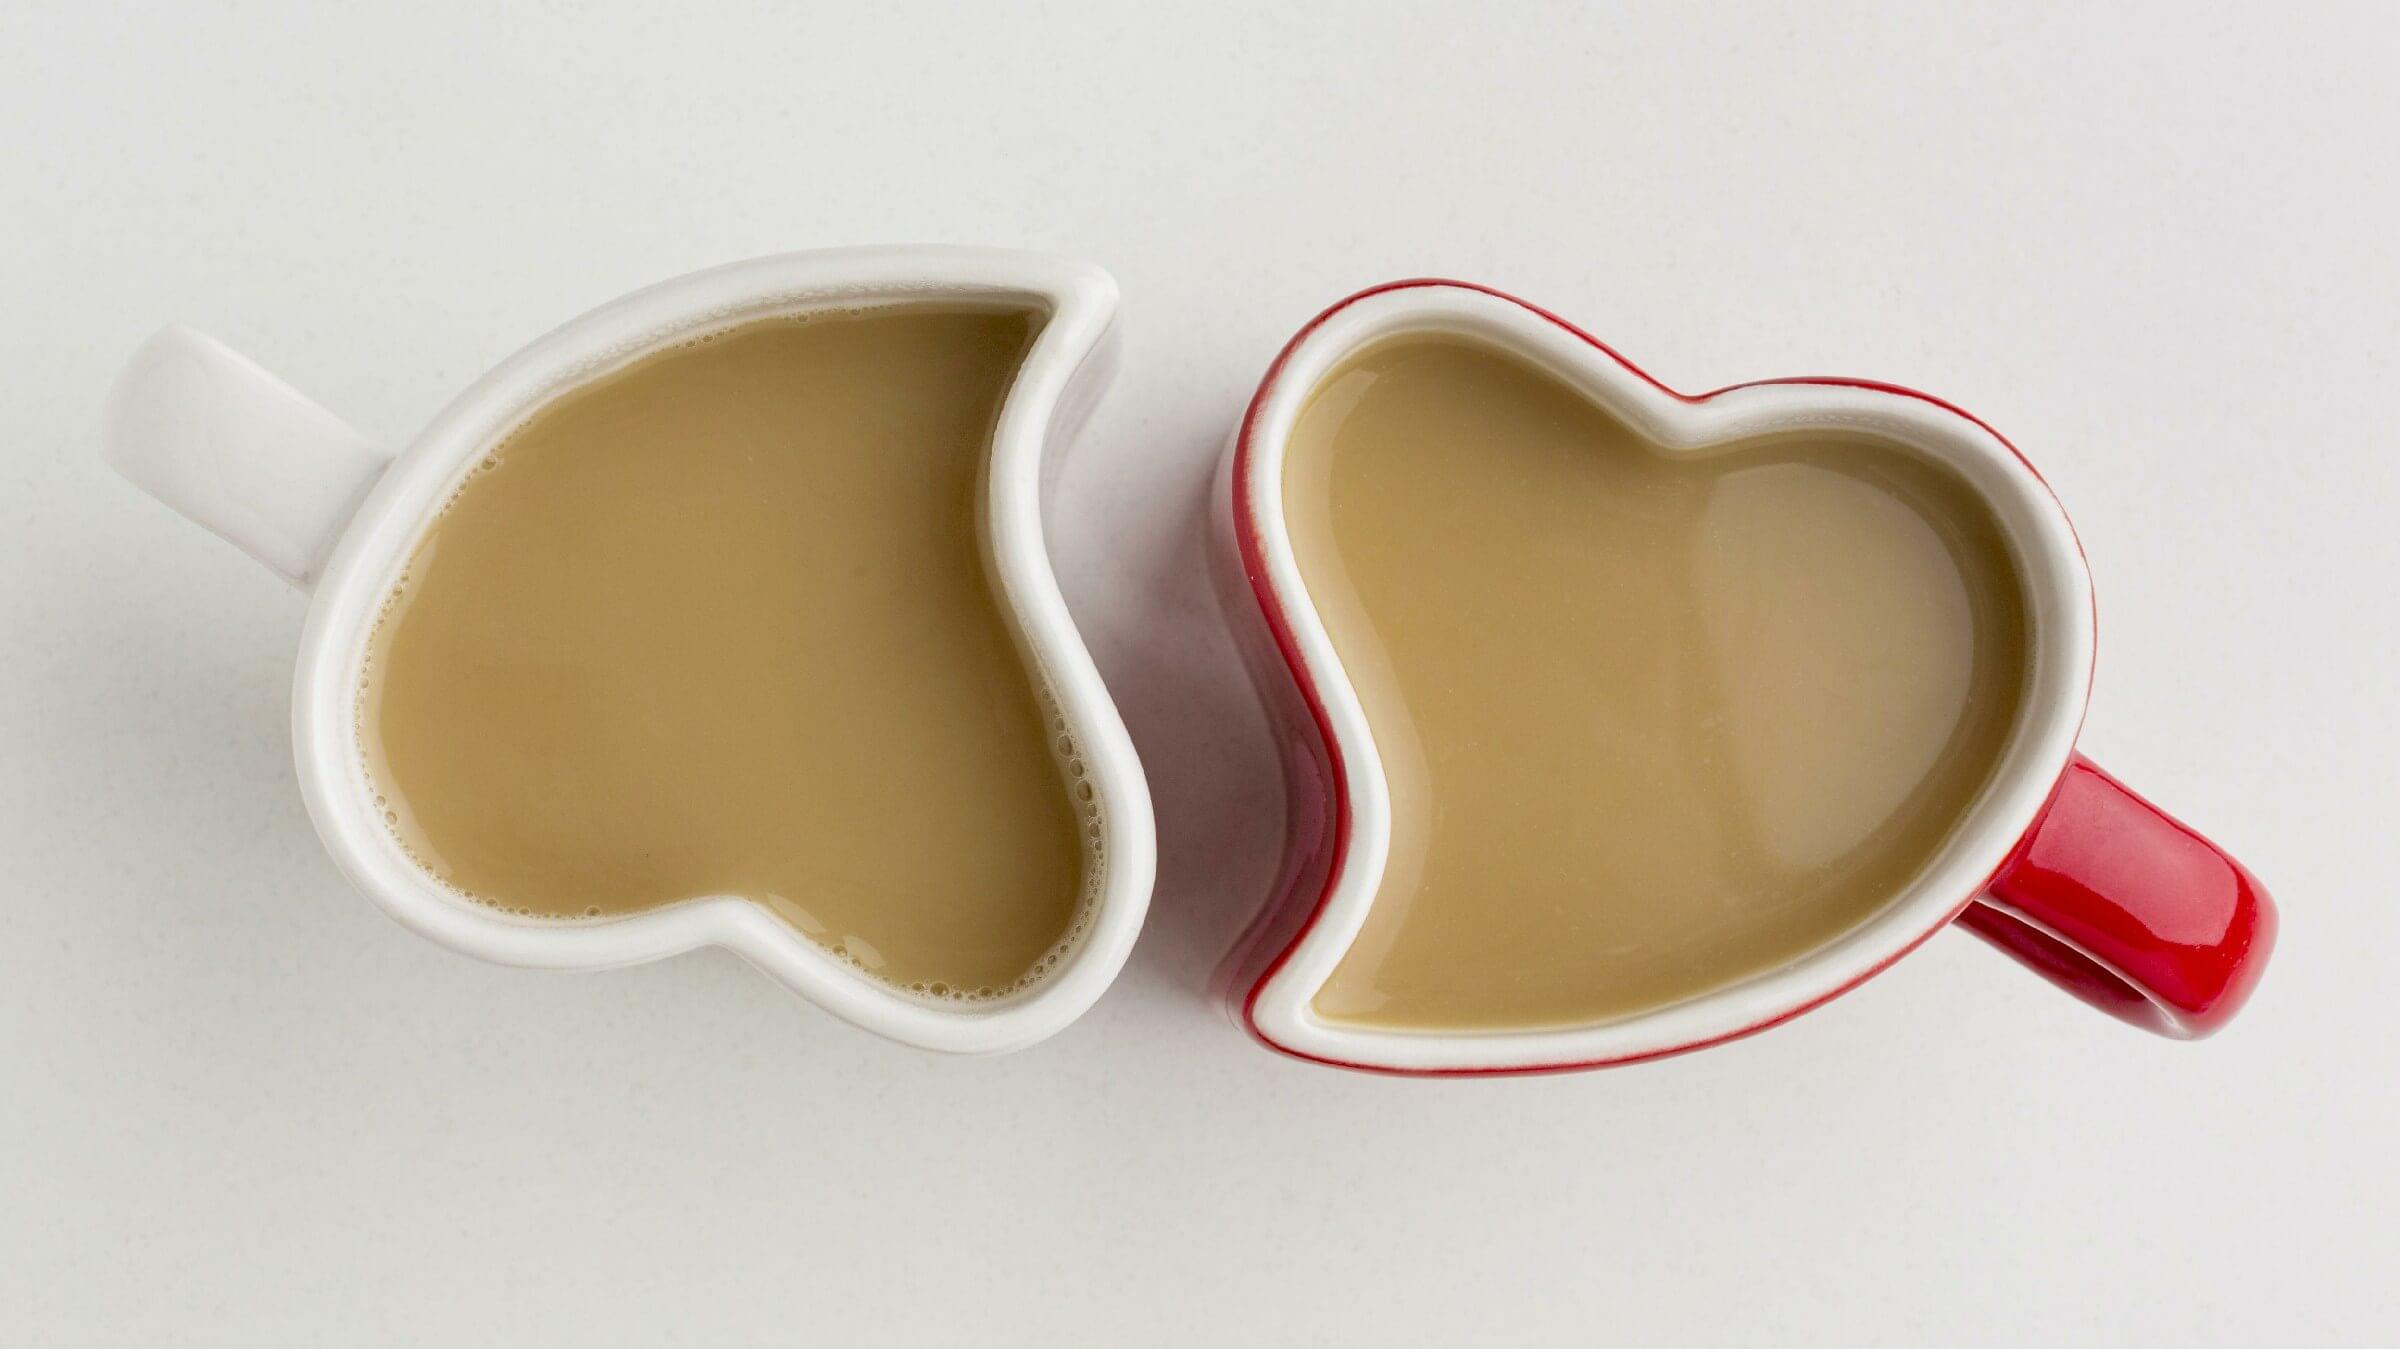 Heart coffee mugs are perfect valentine's decoration for office